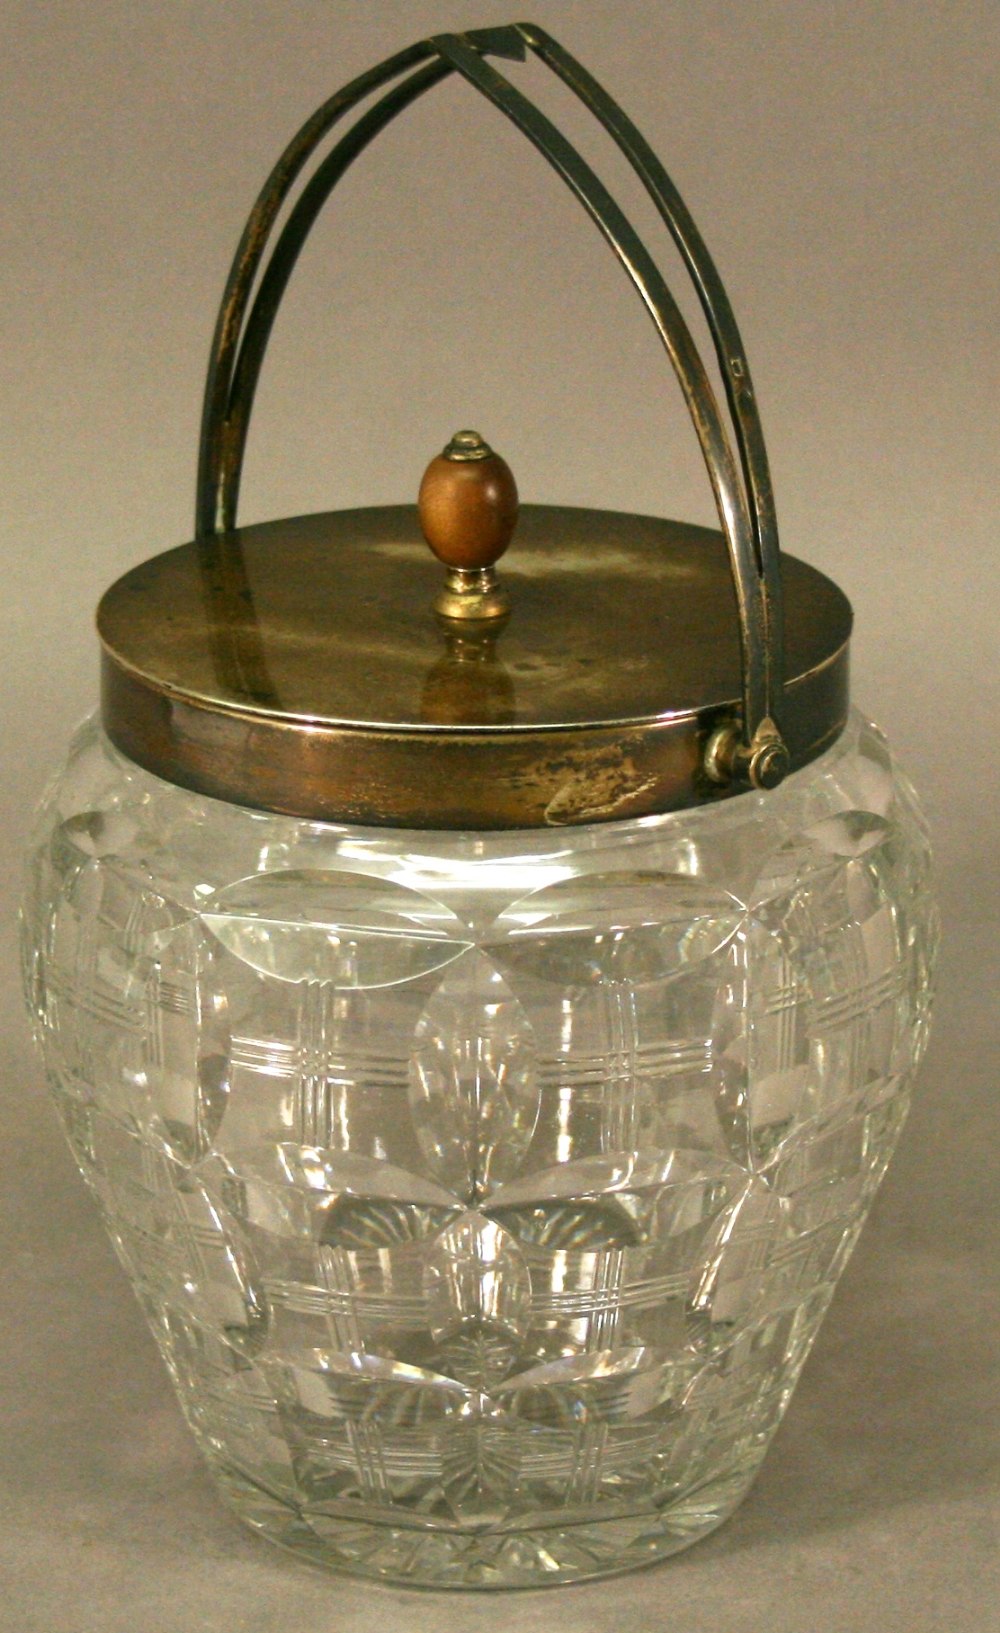 A GEORGE V SILVER-MOUNTED CUT-GLASS BISCUIT BARREL with arched swing handle and plain finial